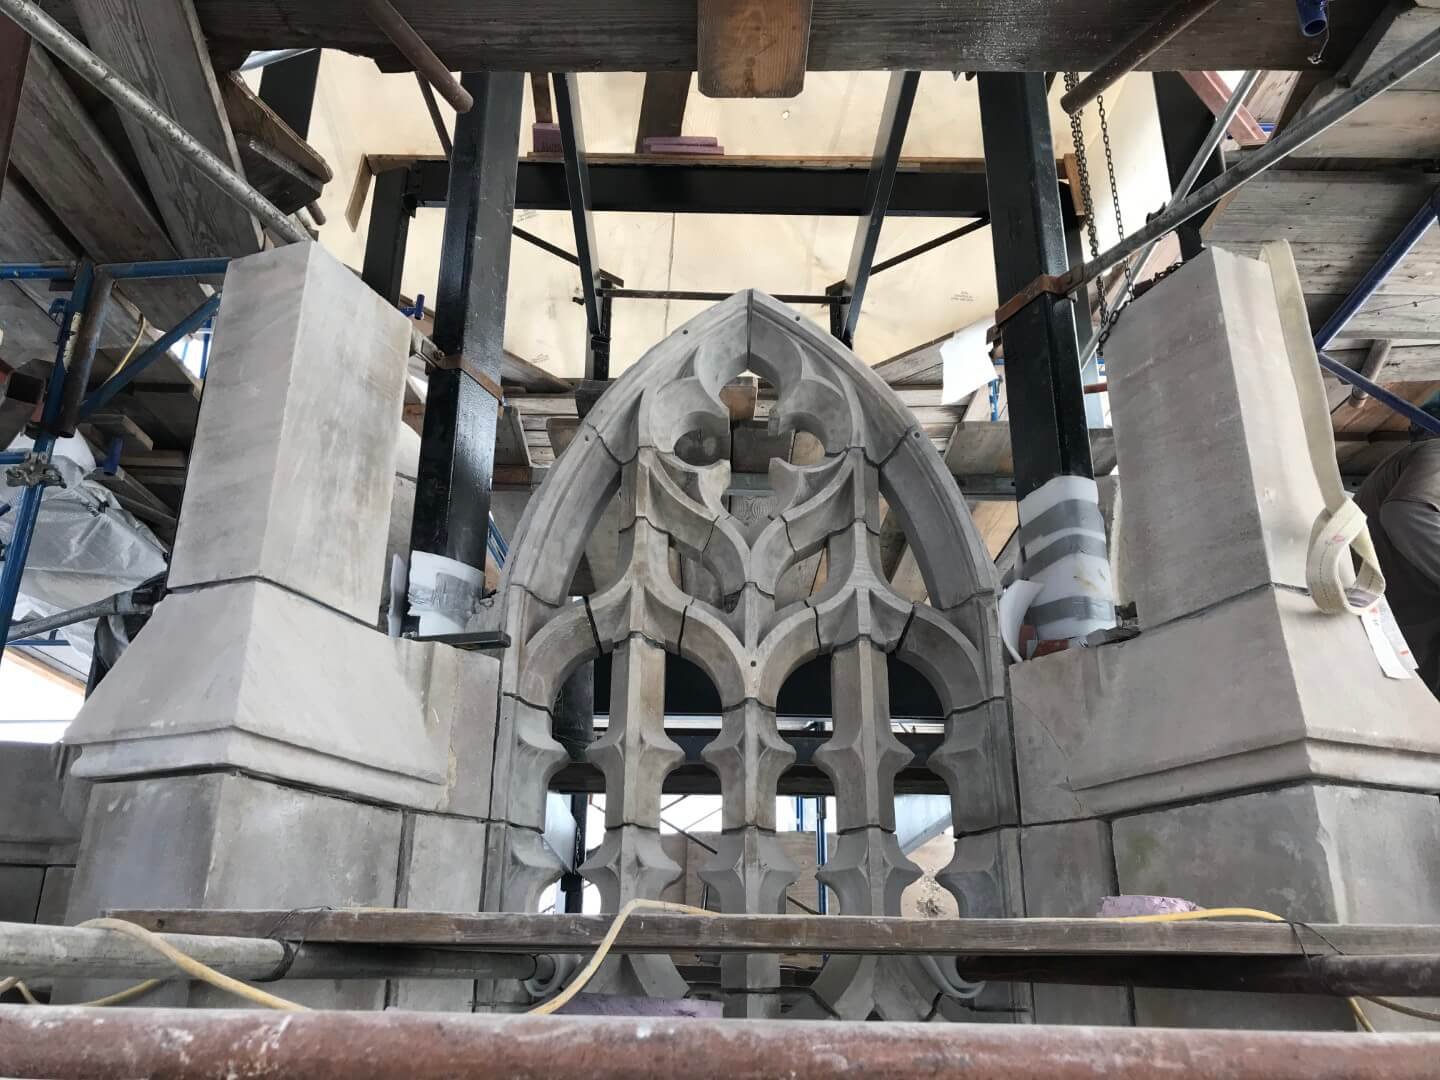 The bell tower being reassembled. Photo courtesy of Walter B. Melvin Architects